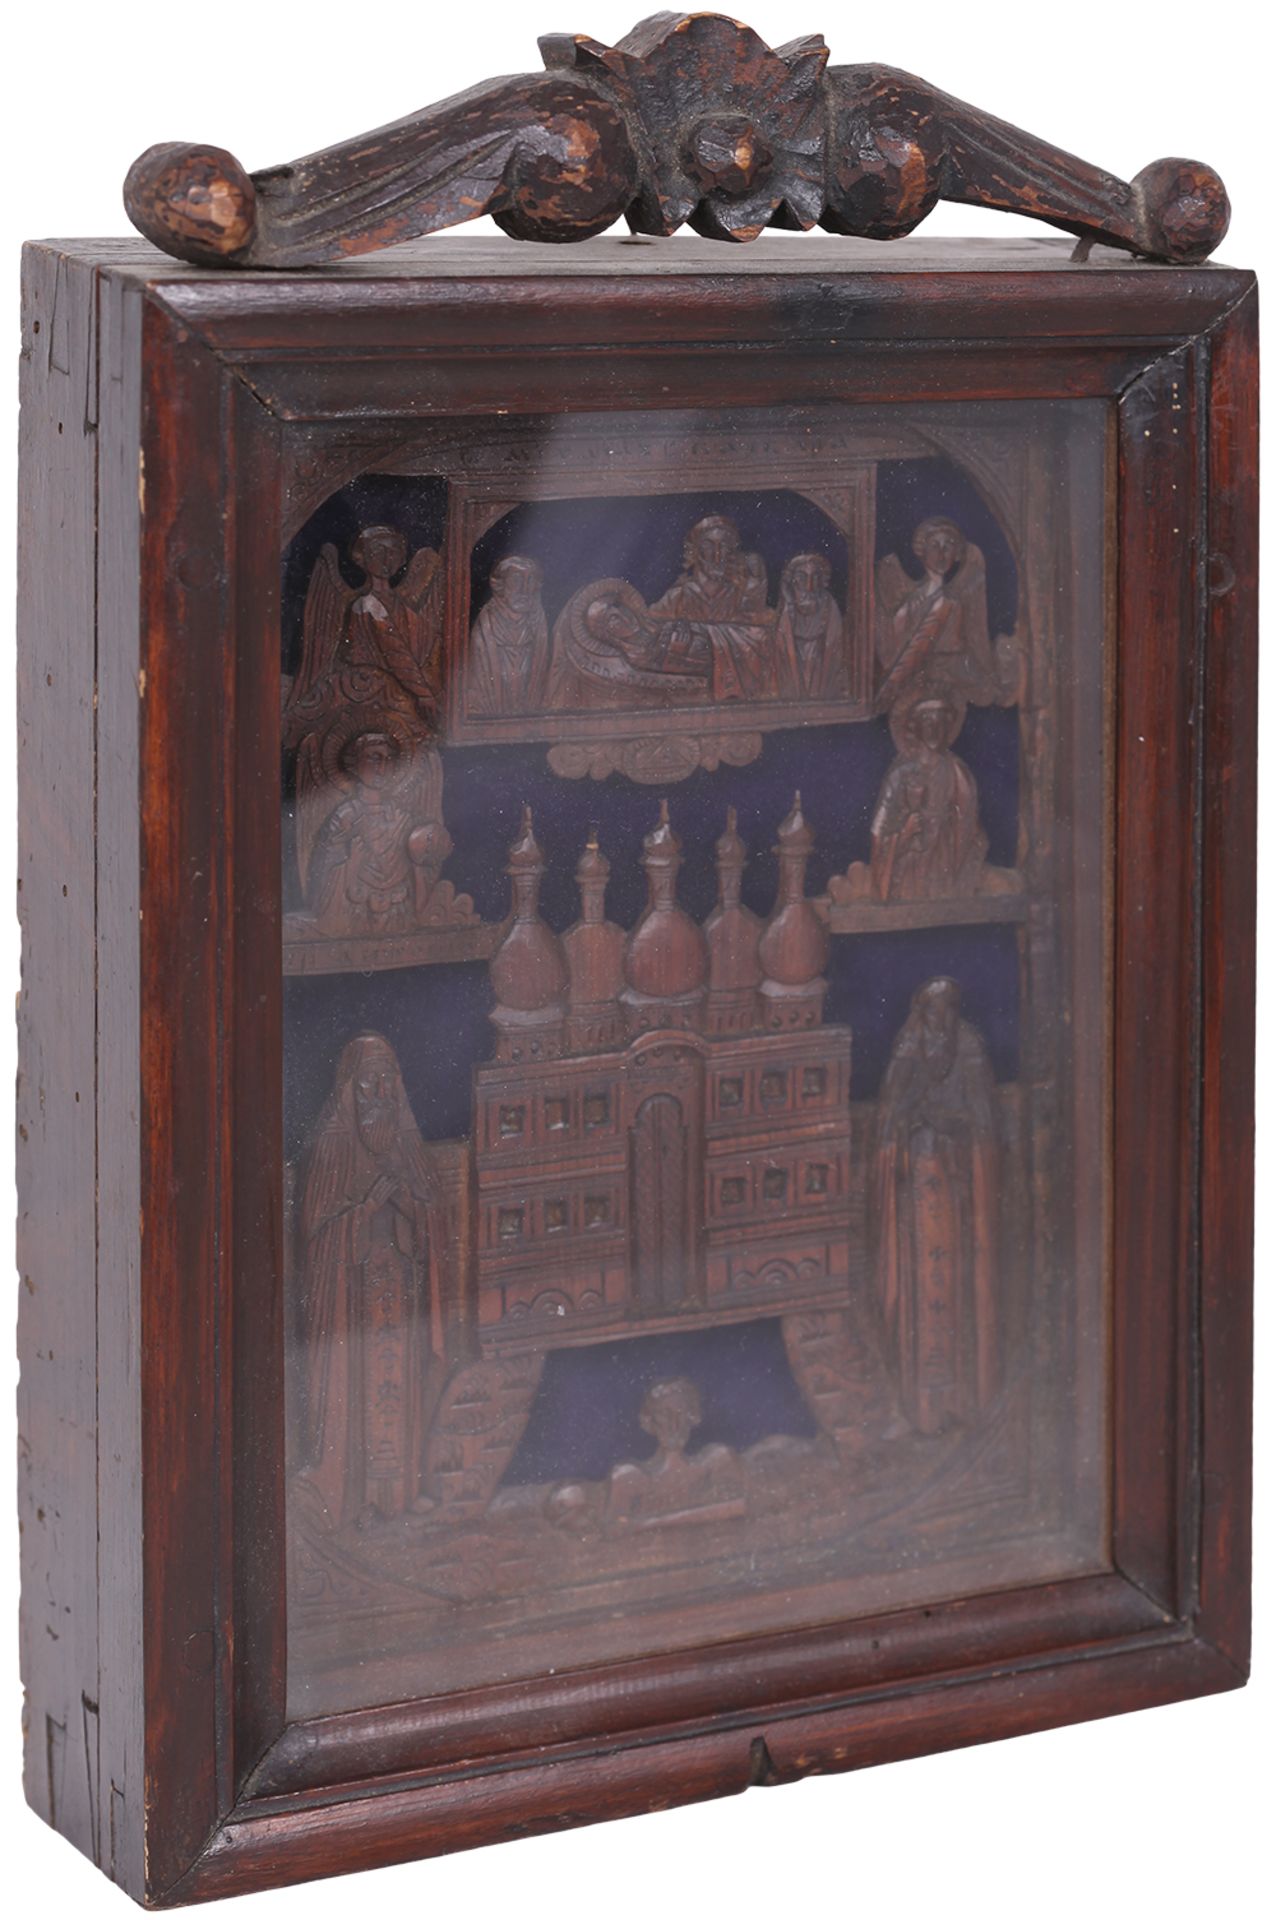 [Russian]. Old Believers icon. Monastery of the Dormition of the Theotokos. 1790. 